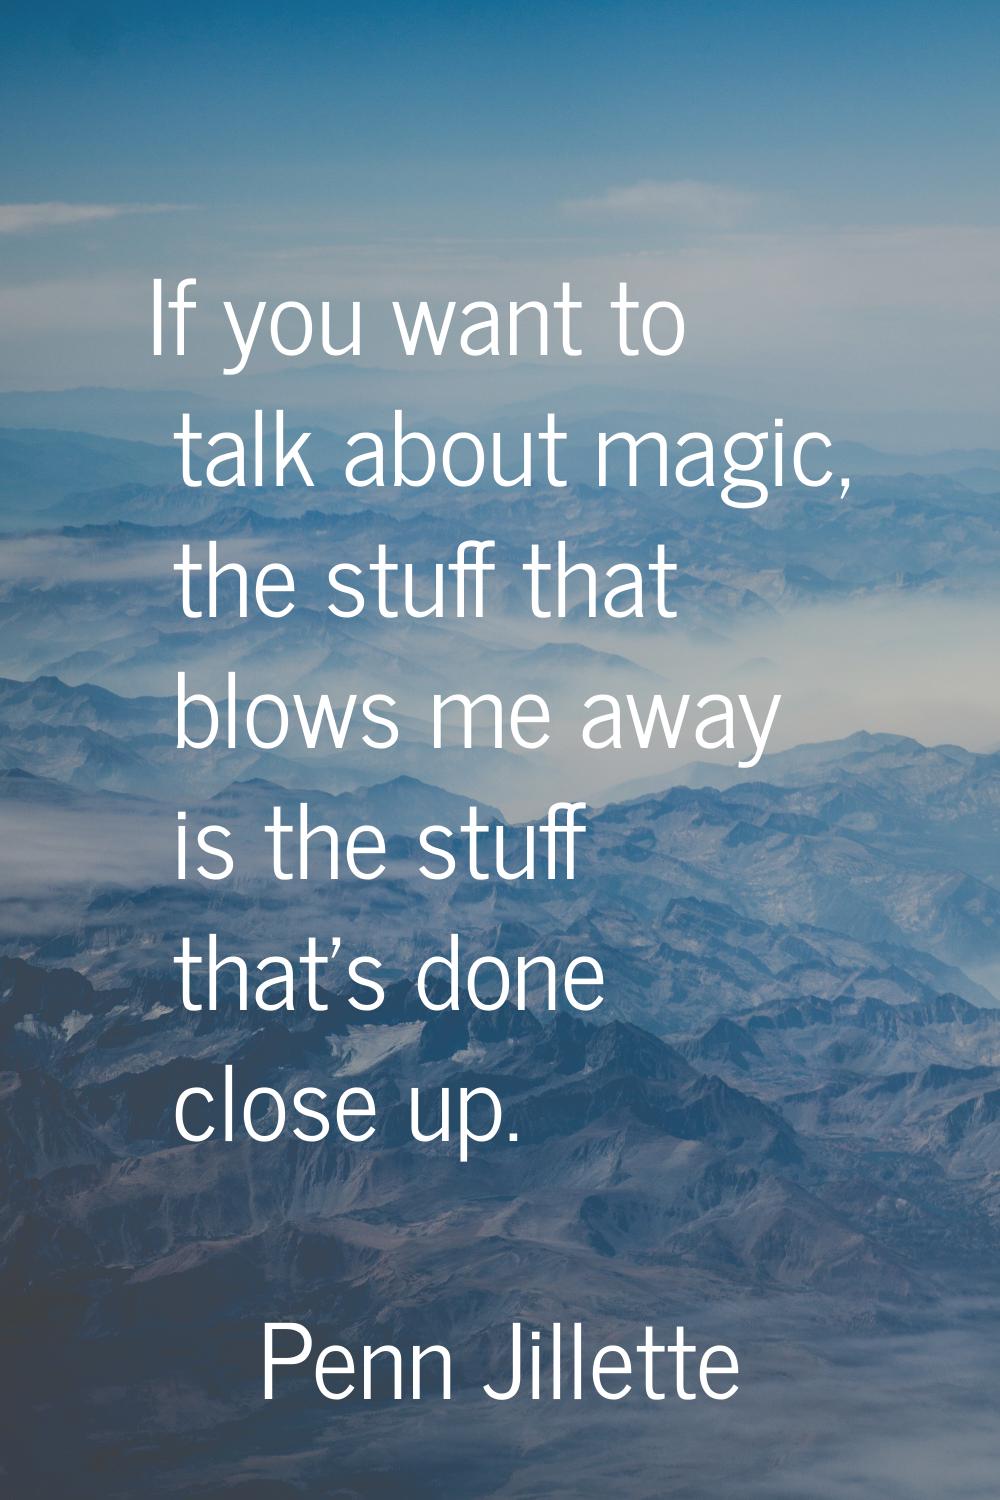 If you want to talk about magic, the stuff that blows me away is the stuff that's done close up.